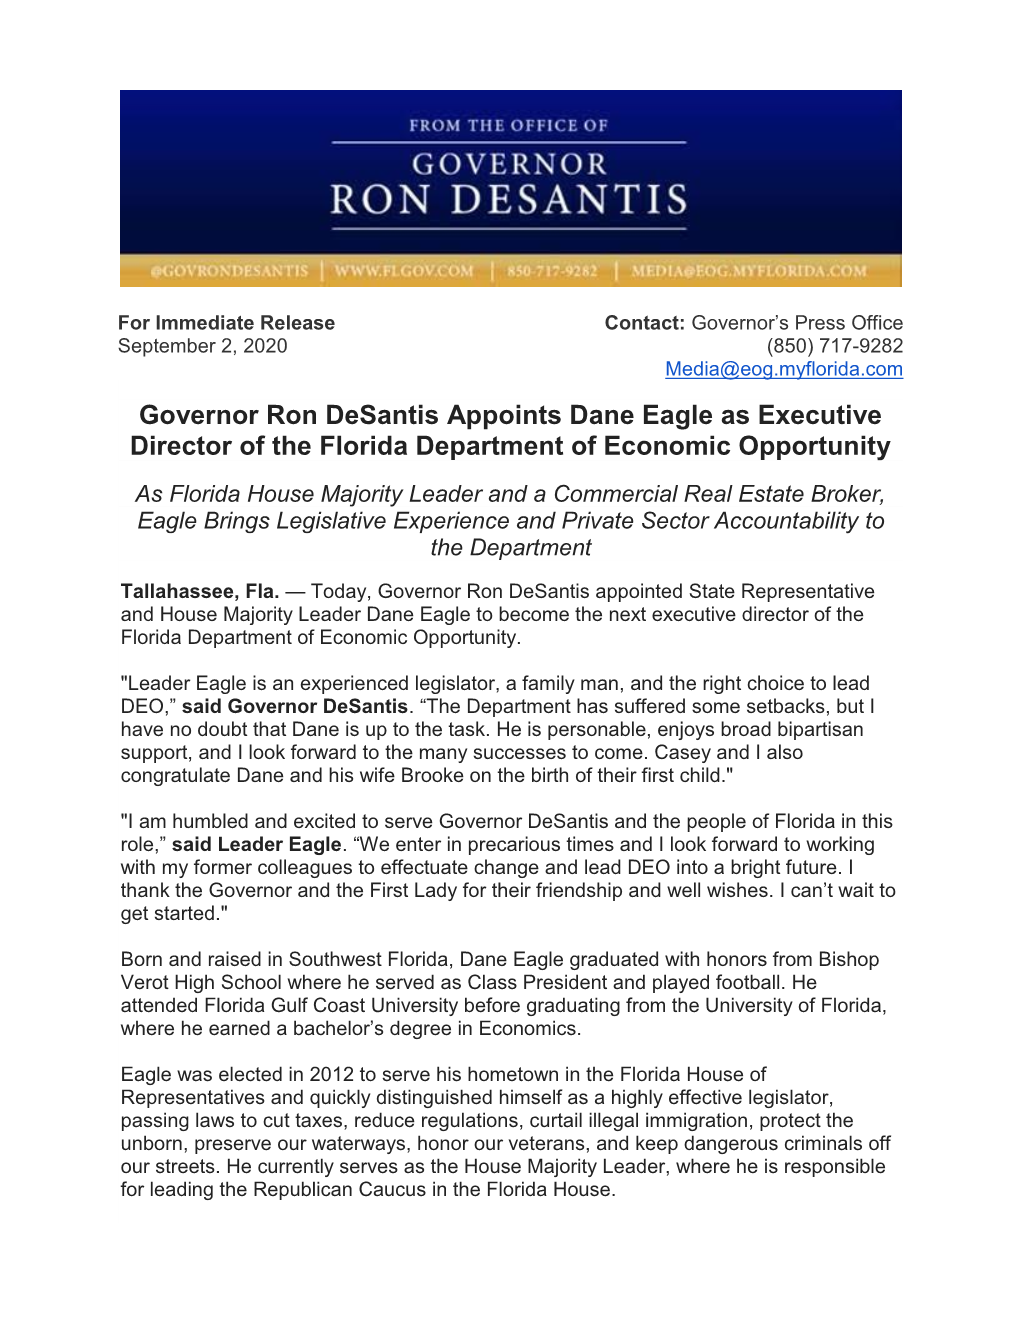 Governor Ron Desantis Appoints Dane Eagle As Executive Director of the Florida Department of Economic Opportunity